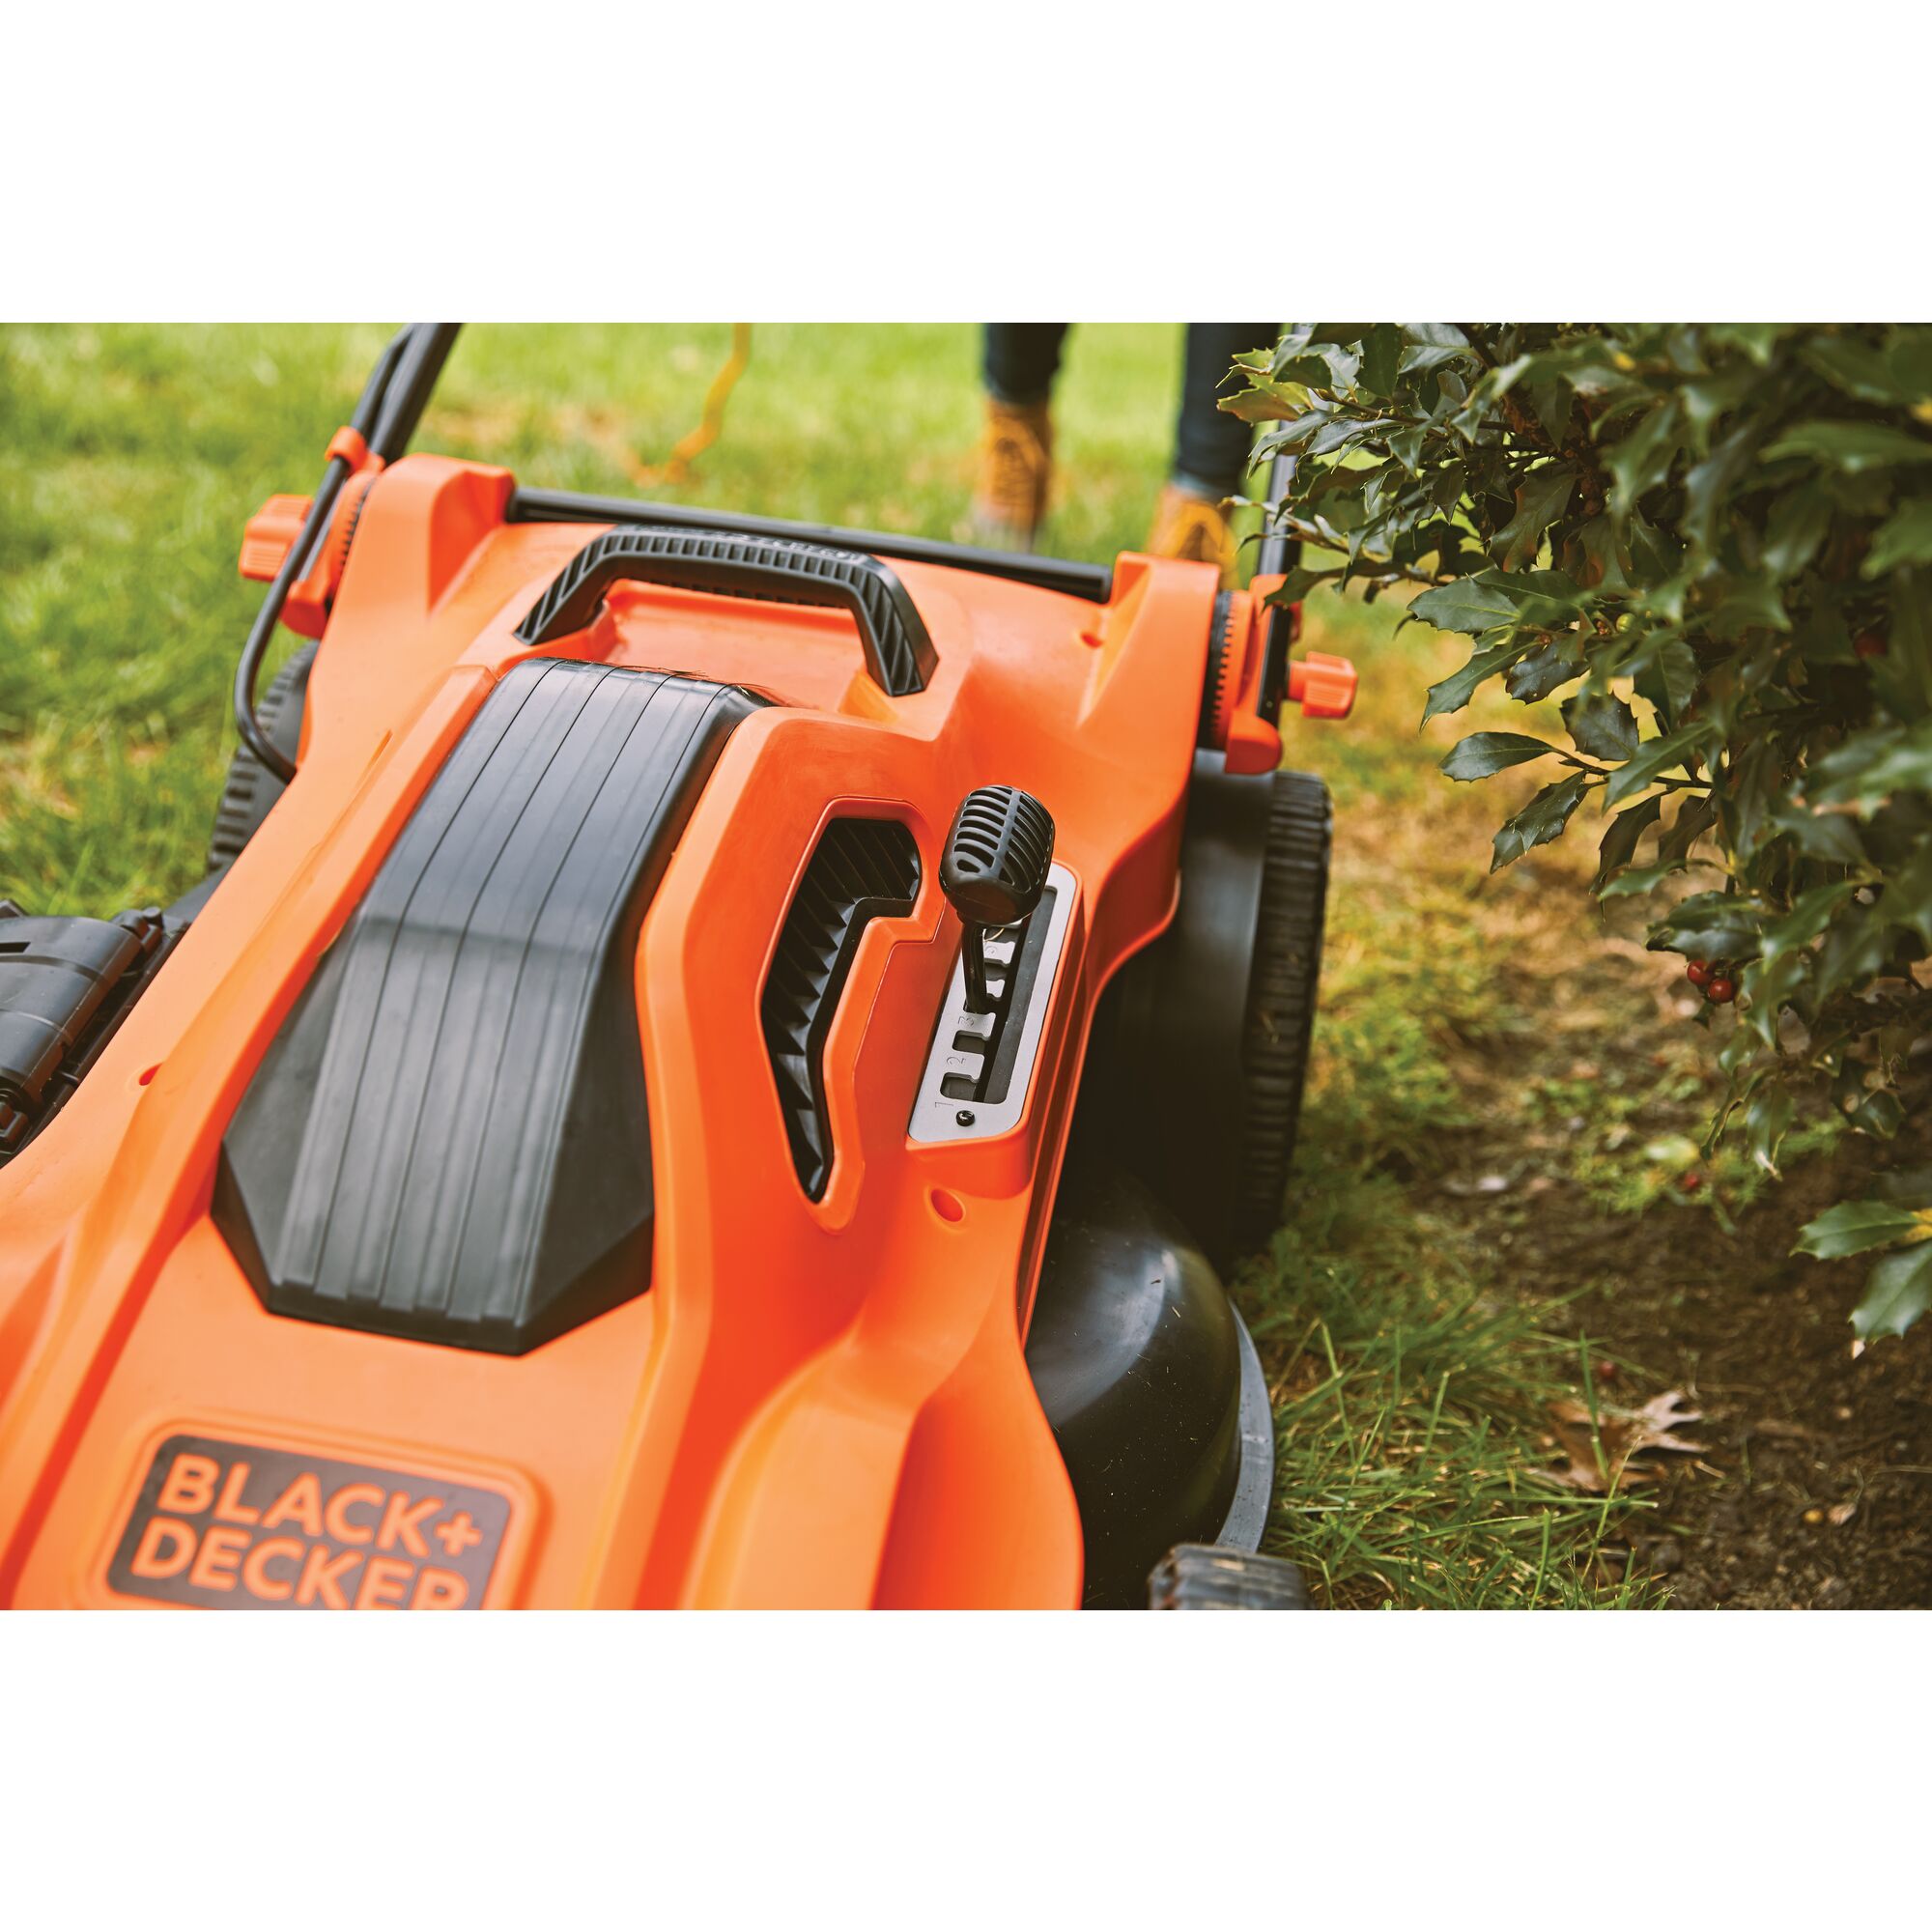 OEM Black and Decker Lawn Mower Parts & Accessories –